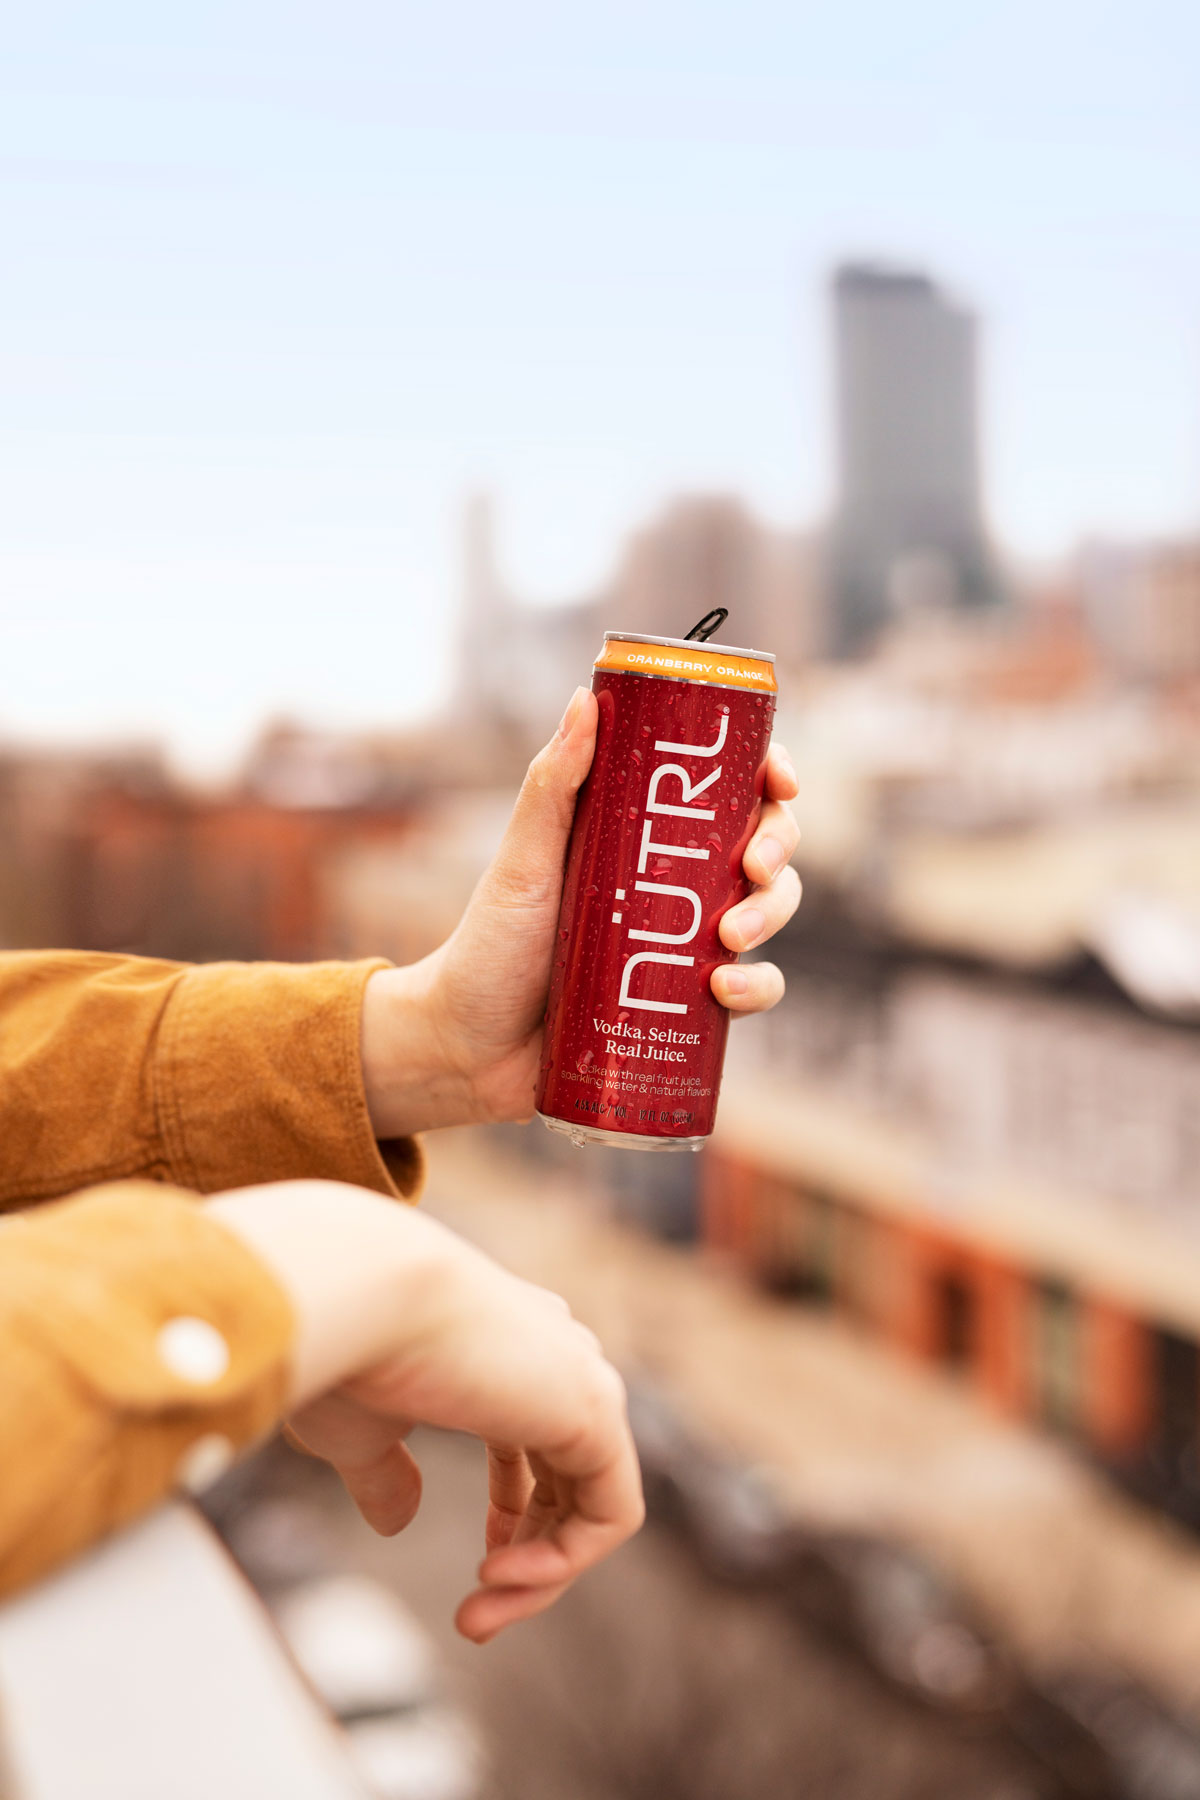 get-ready-for-a-new-fall-favorite-n-trl-cranberry-vodka-seltzer-now